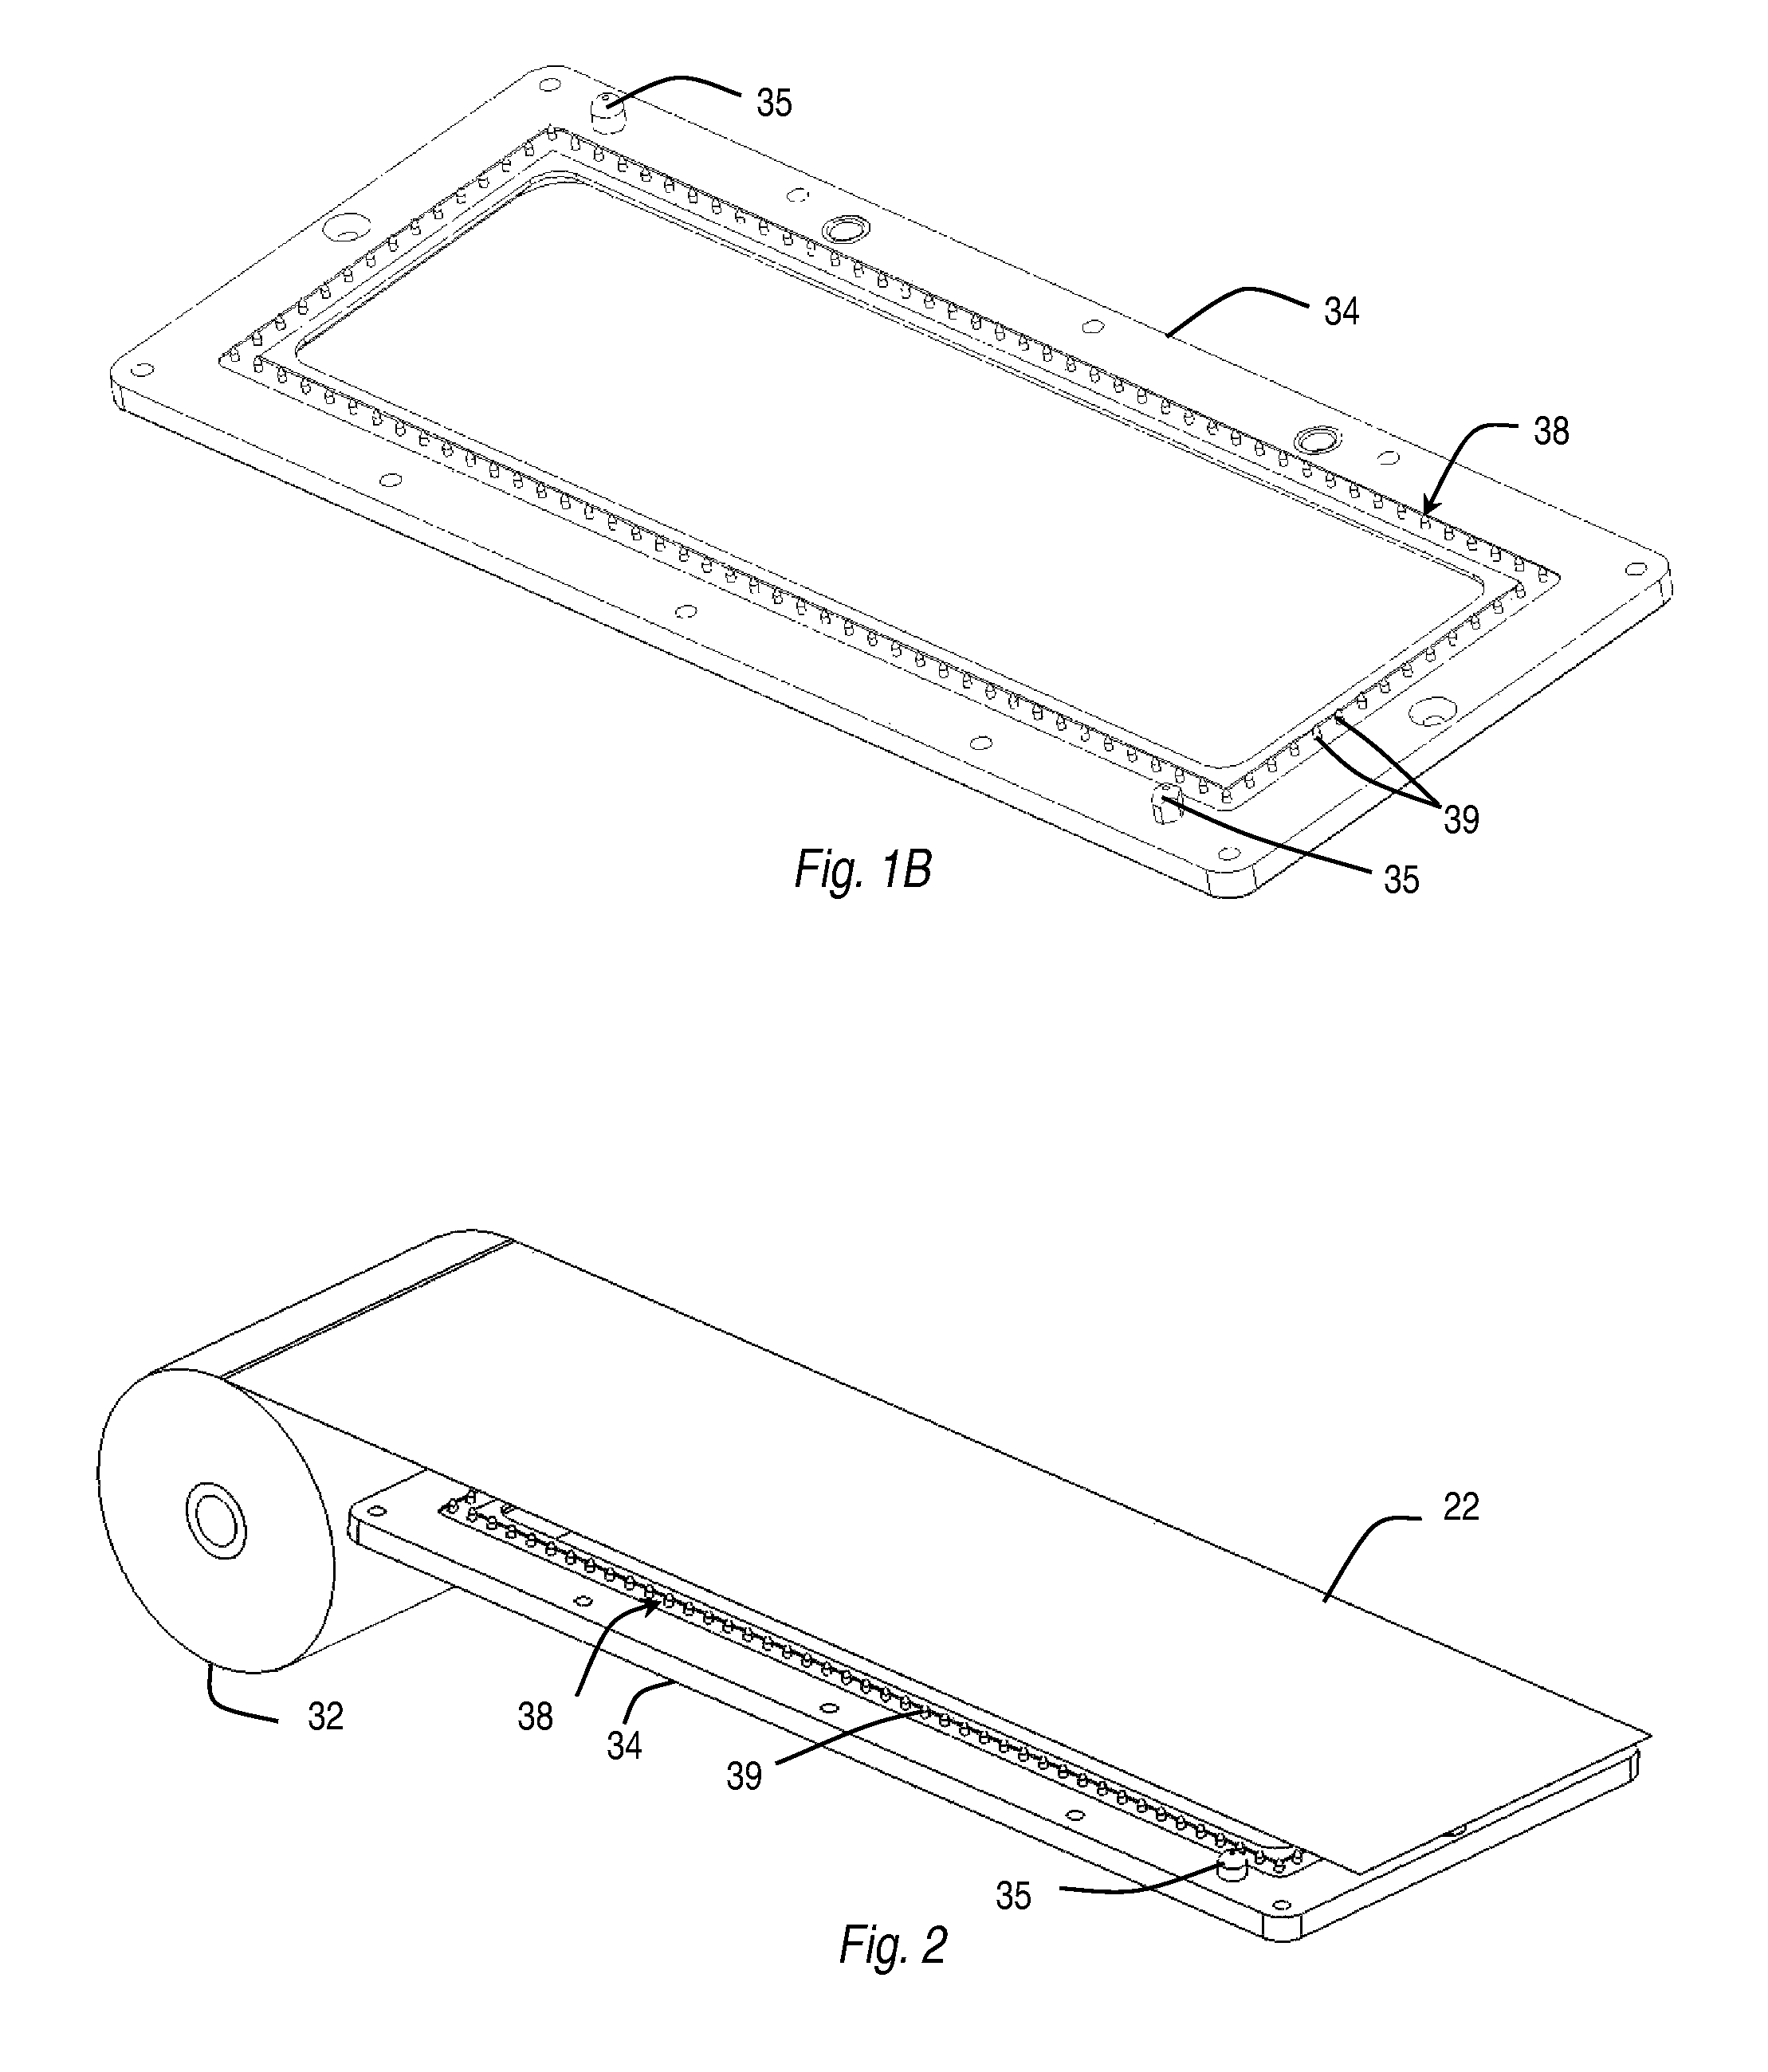 Process for manufacturing a microcircuit cochlear electrode array